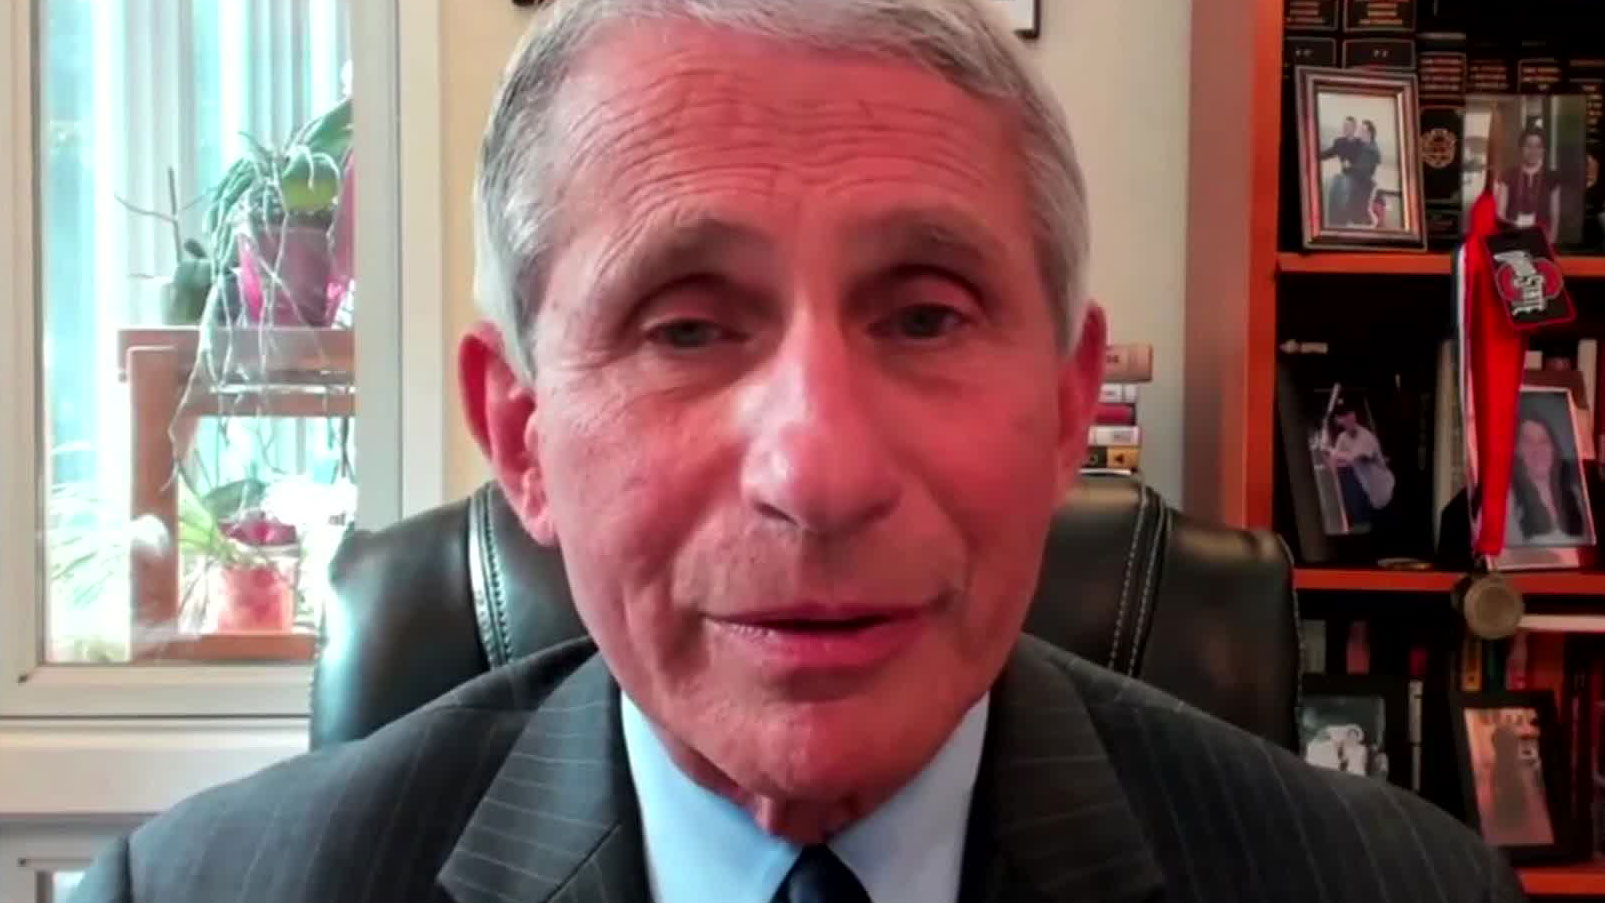 Dr. Anthony Fauci, director of the US National Institute of Allergy and Infectious Diseases.